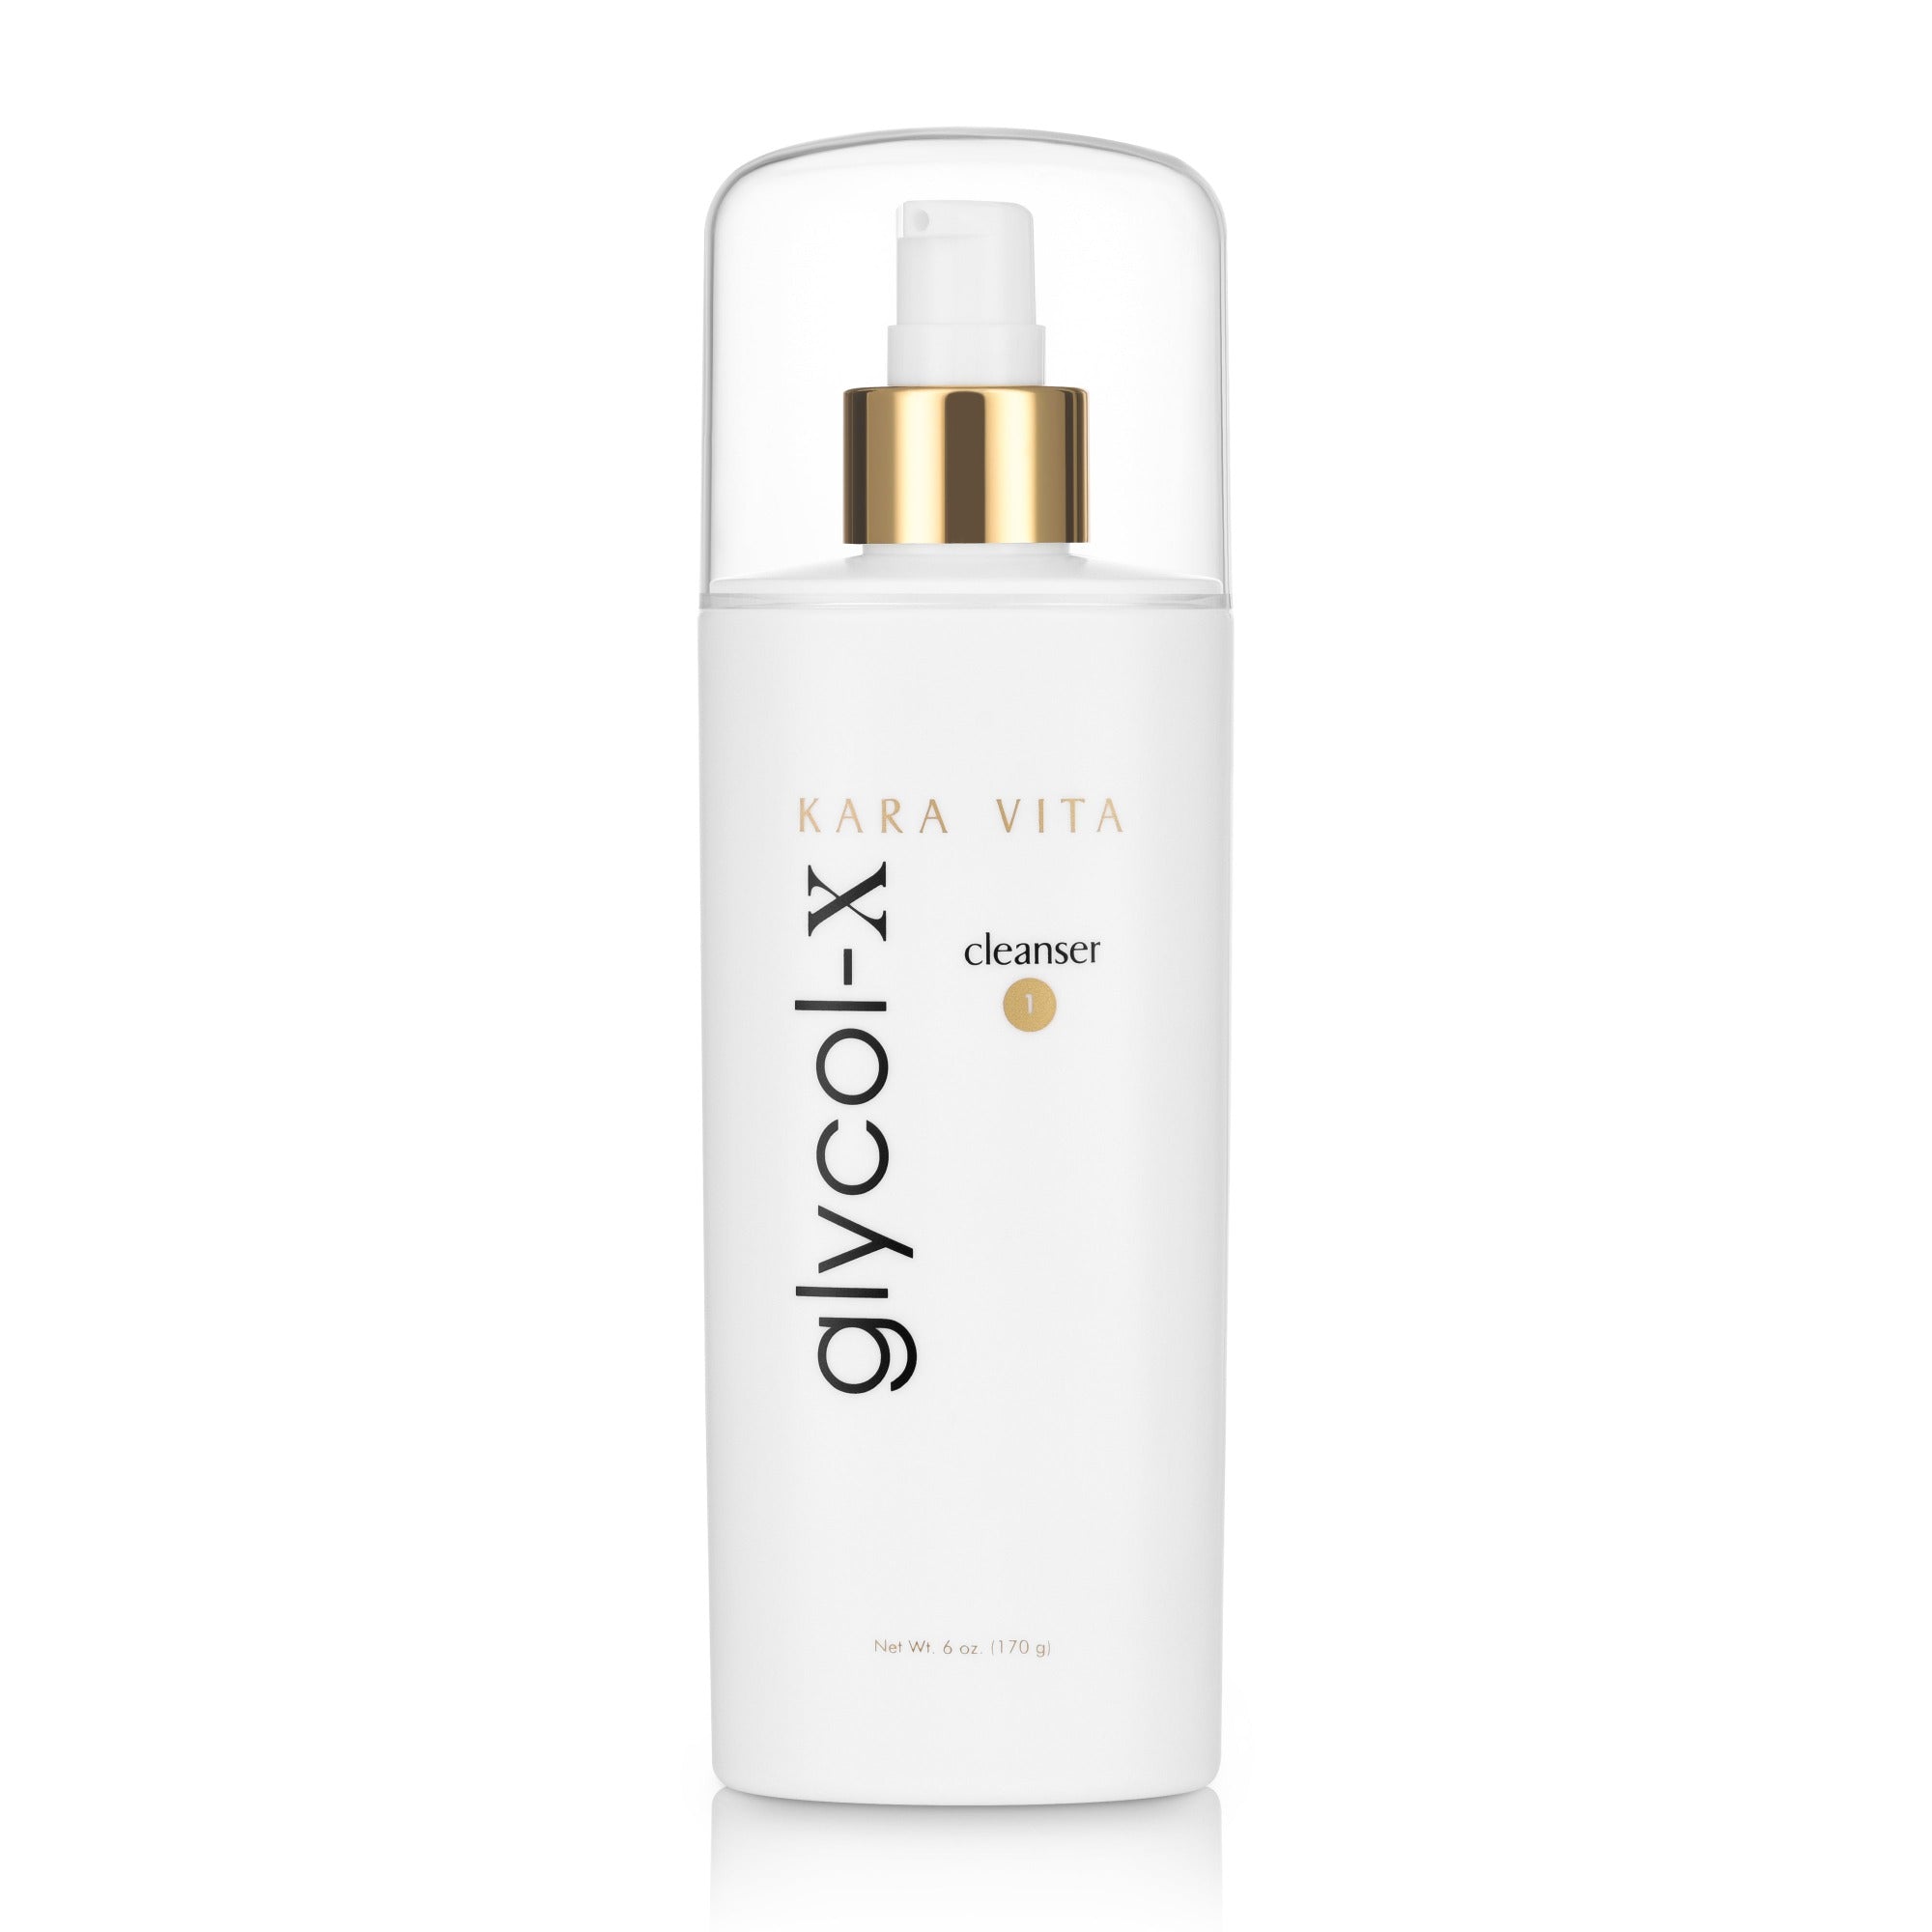 gentle glycolic cleanser for anti-aging